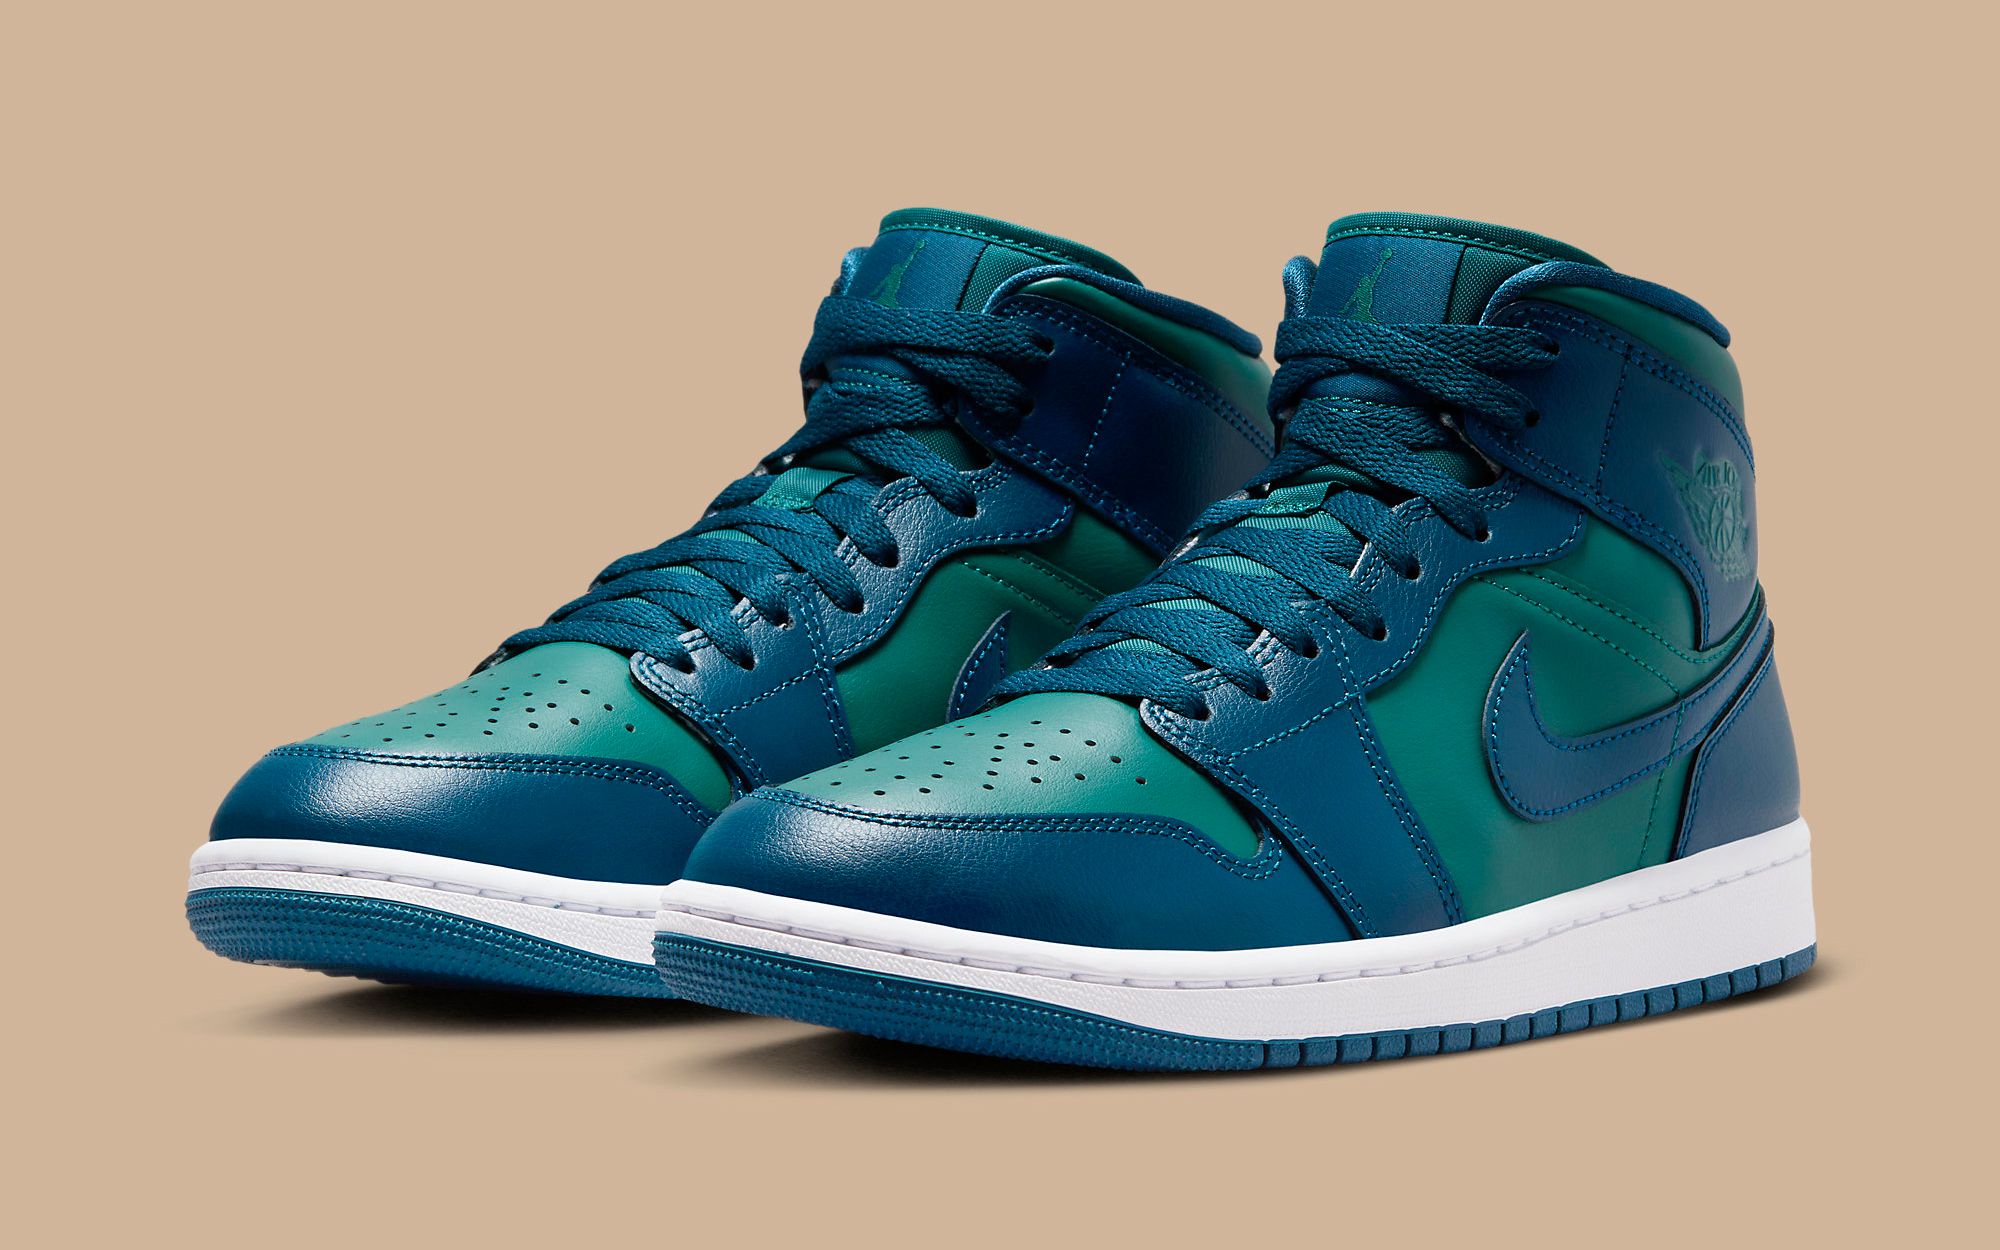 The Air Jordan 1 Mid is Available Now in 